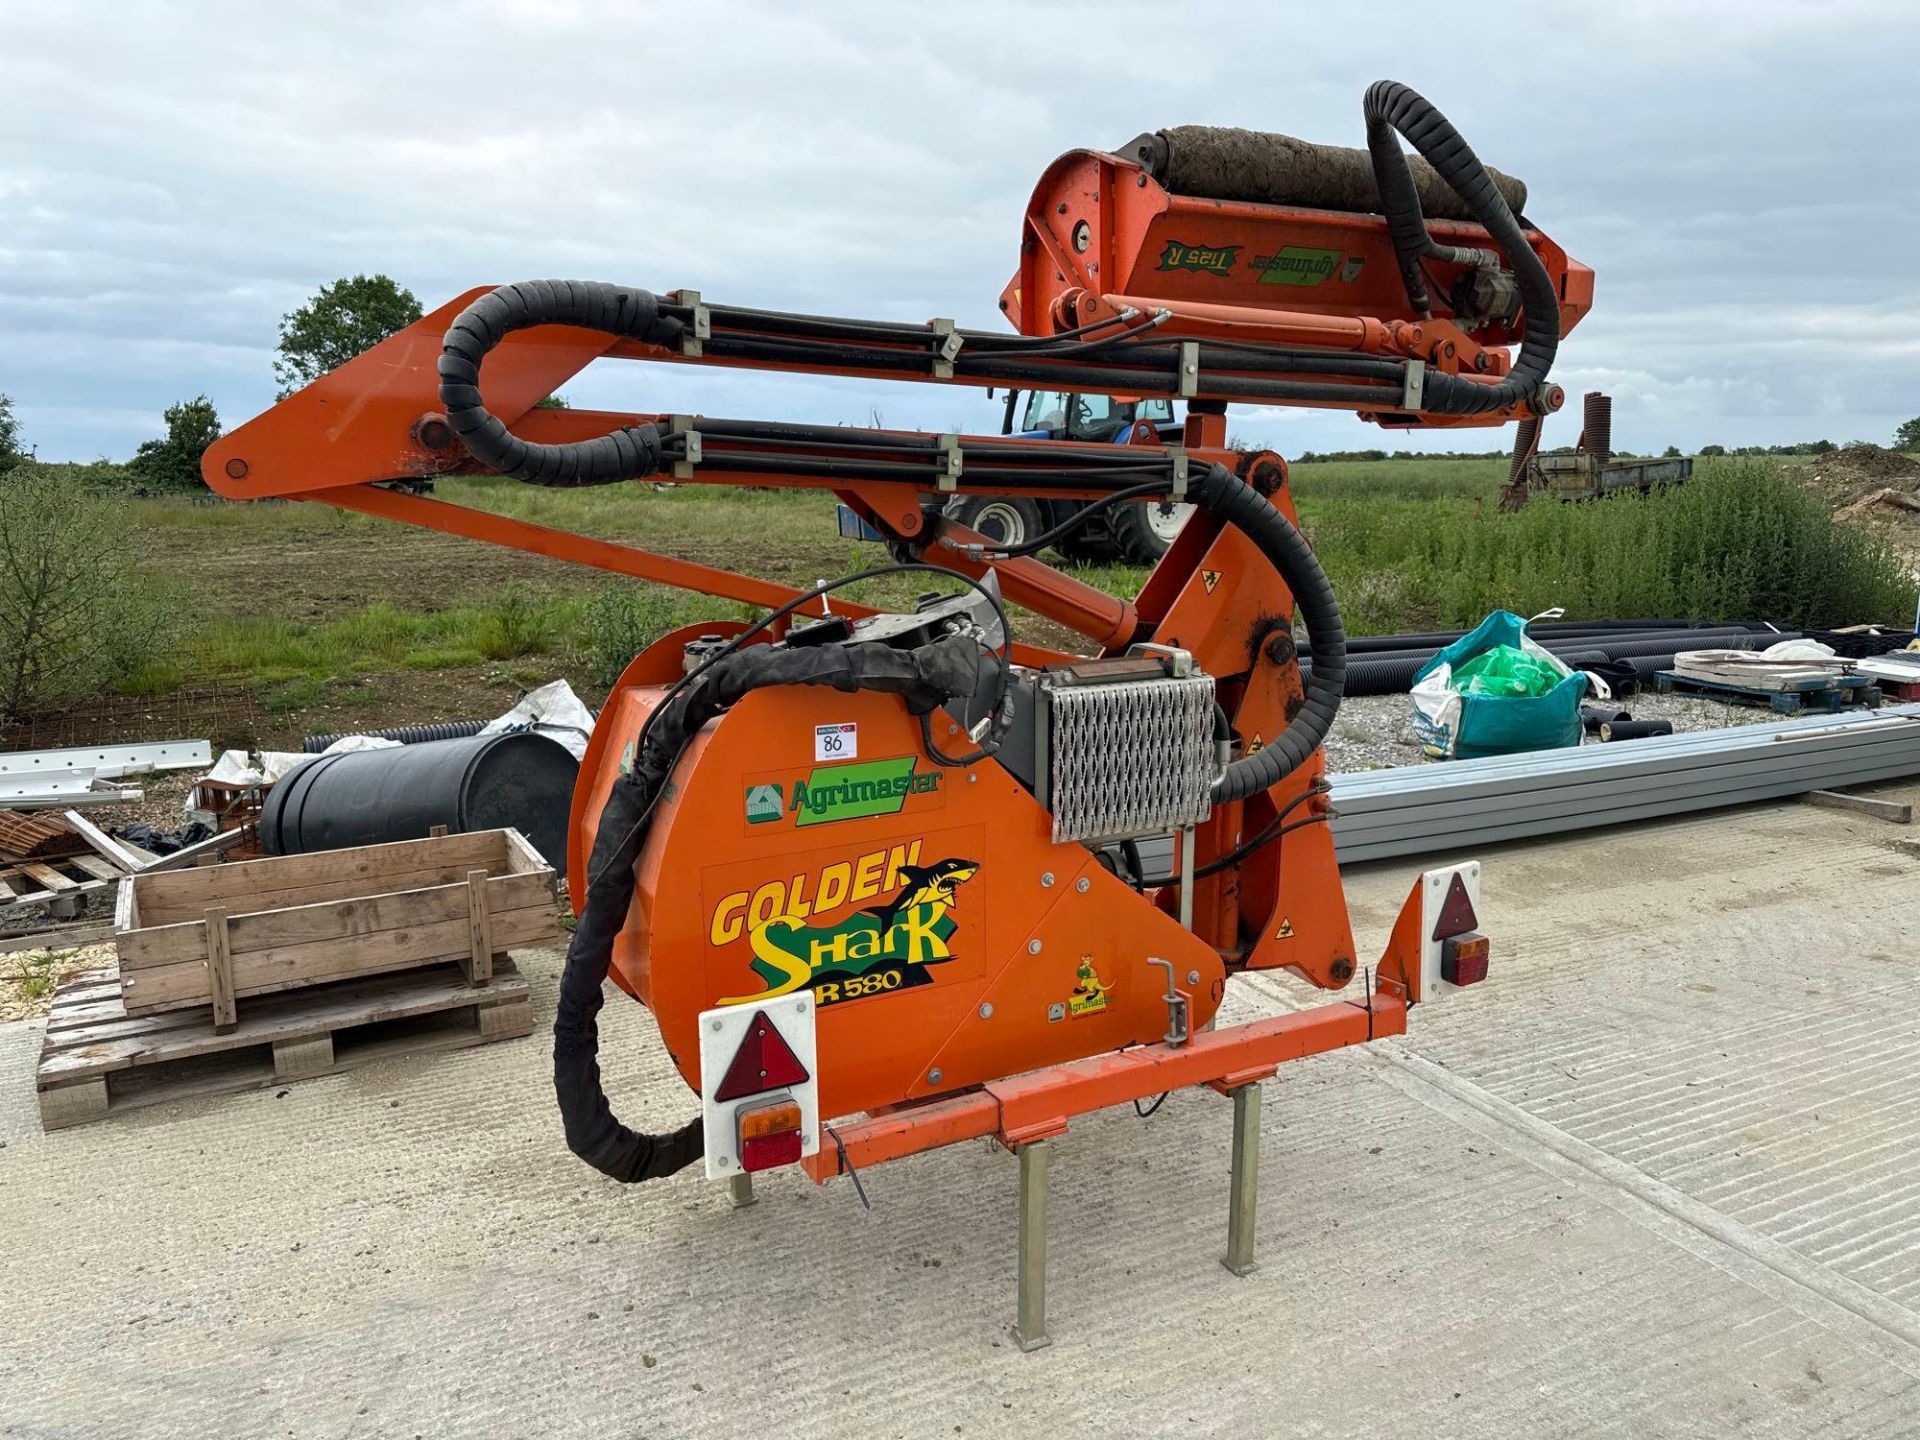 2007 Agrimaster Golden Shark R580 hedgecutter with 1.2m flail head and electric joystick control